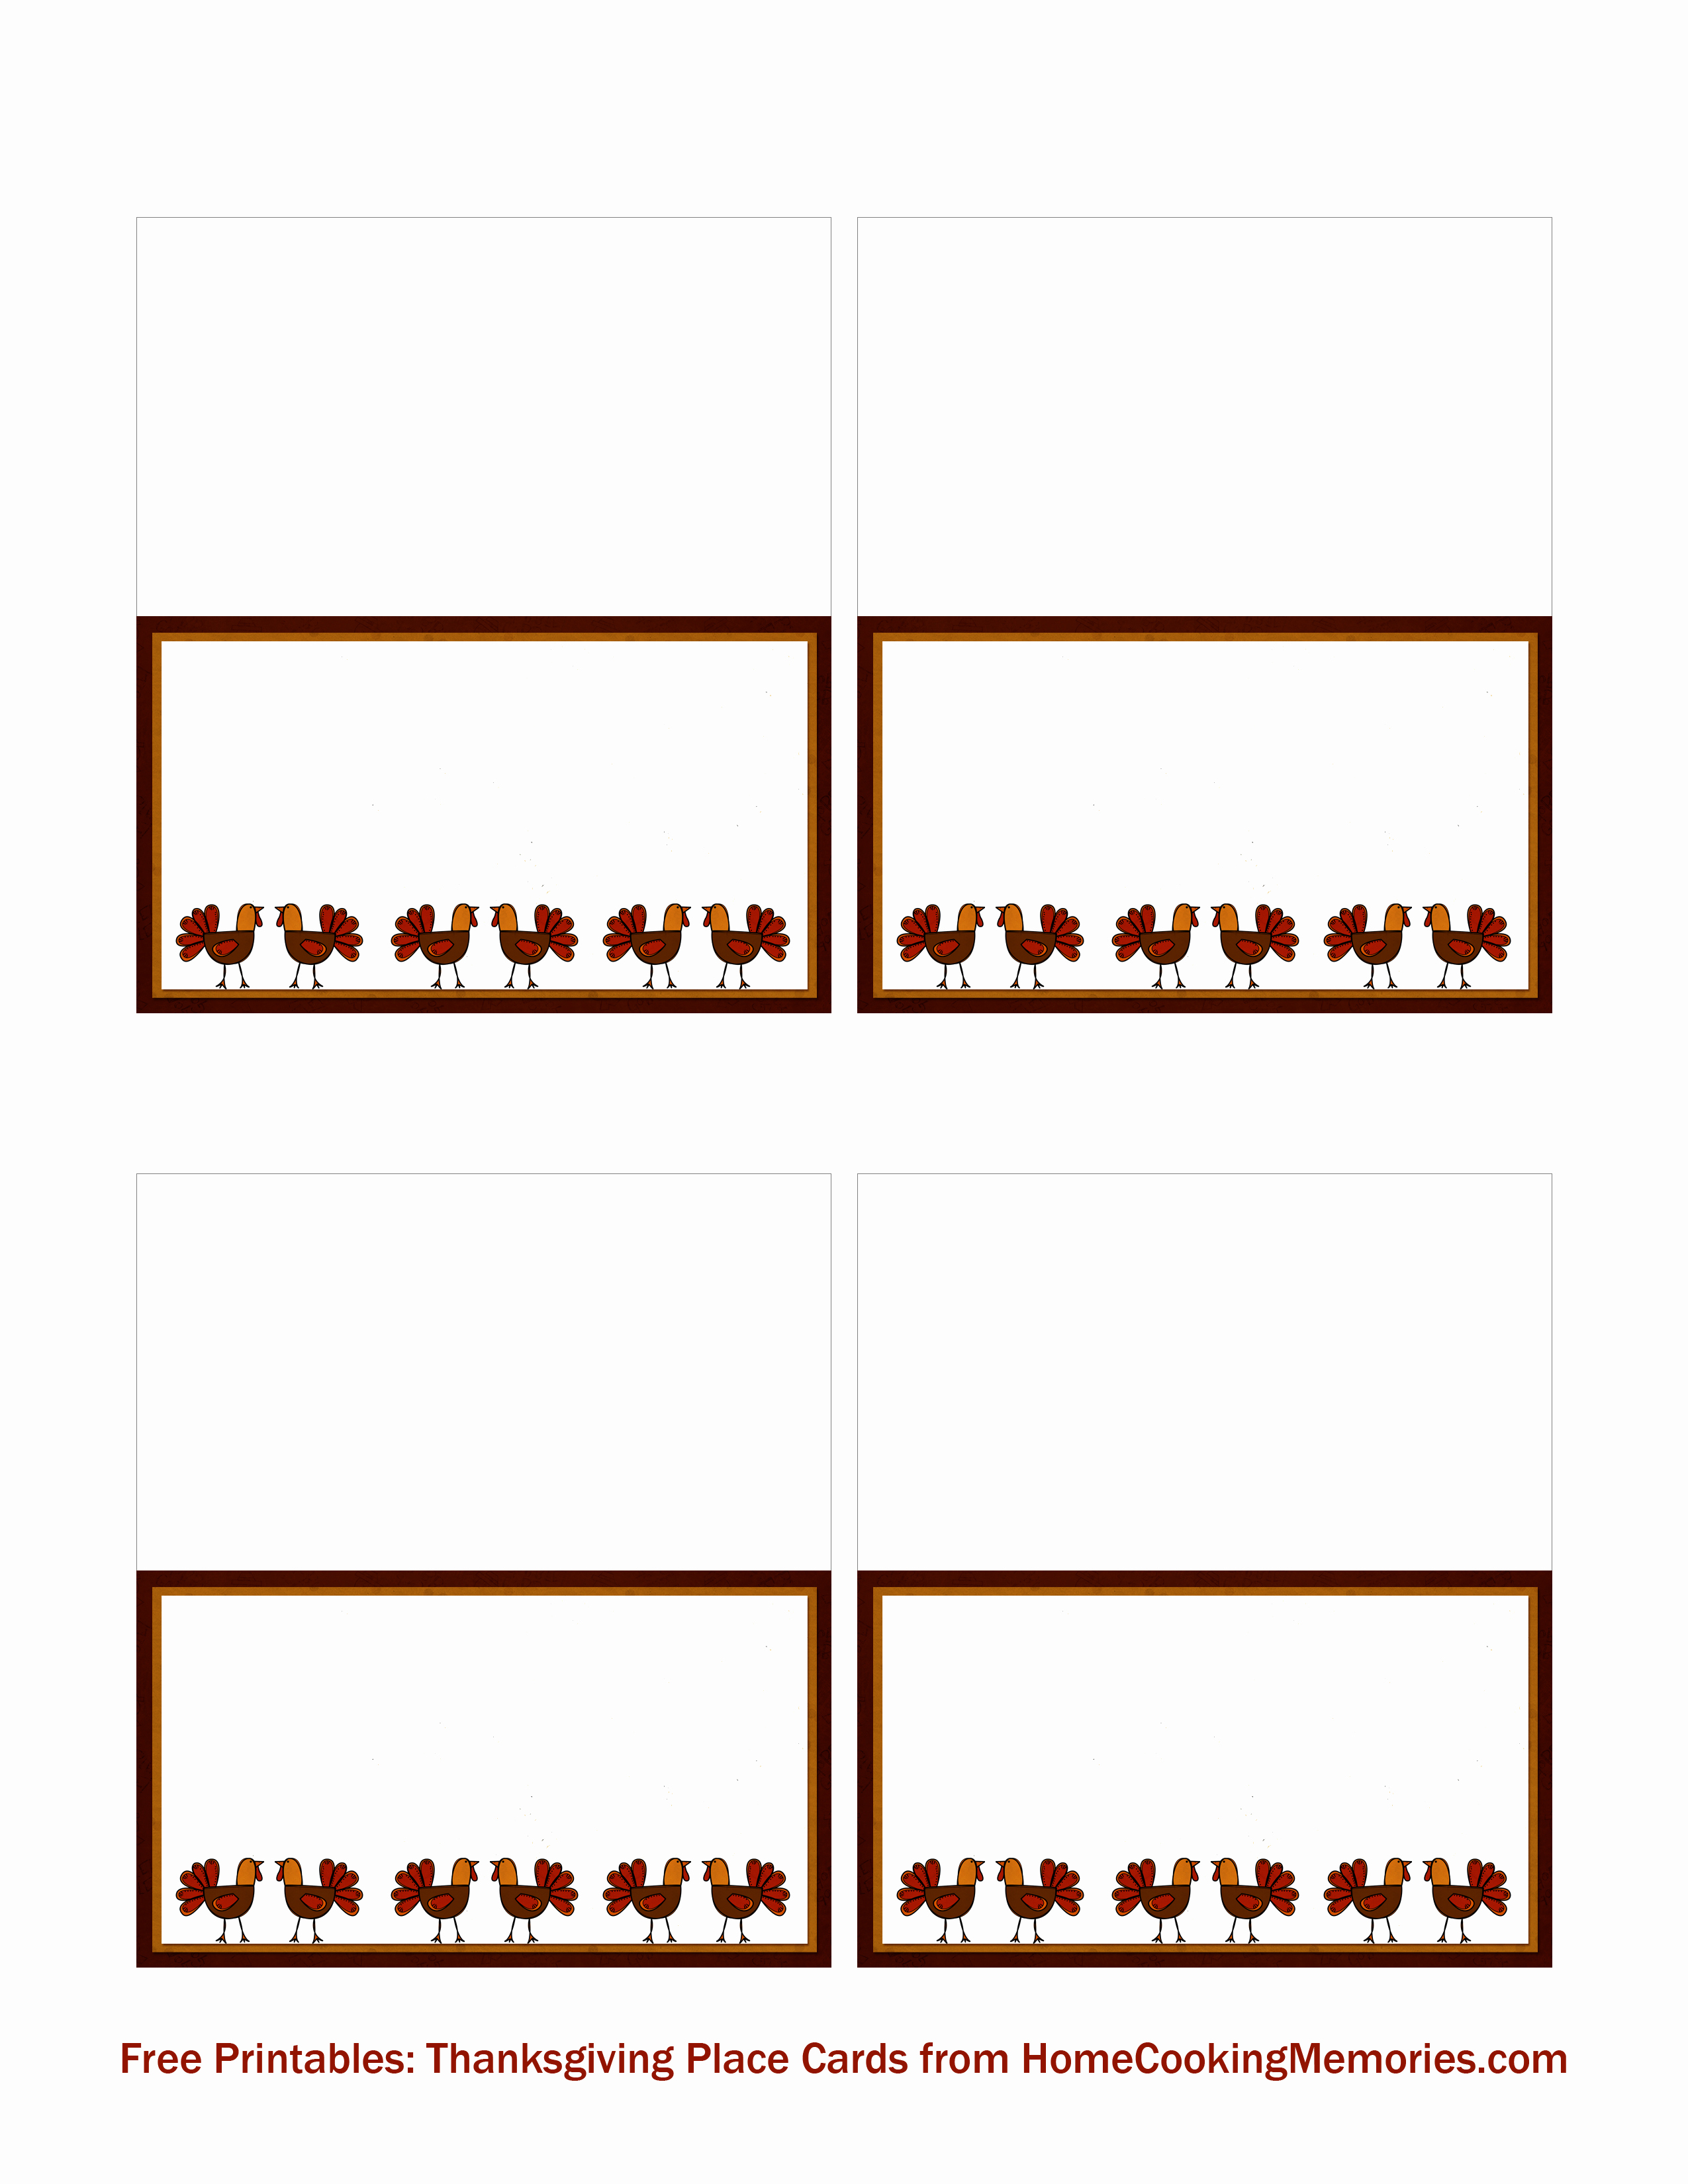 Free Place Card Template Unique Free Printables Thanksgiving Place Cards Home Cooking